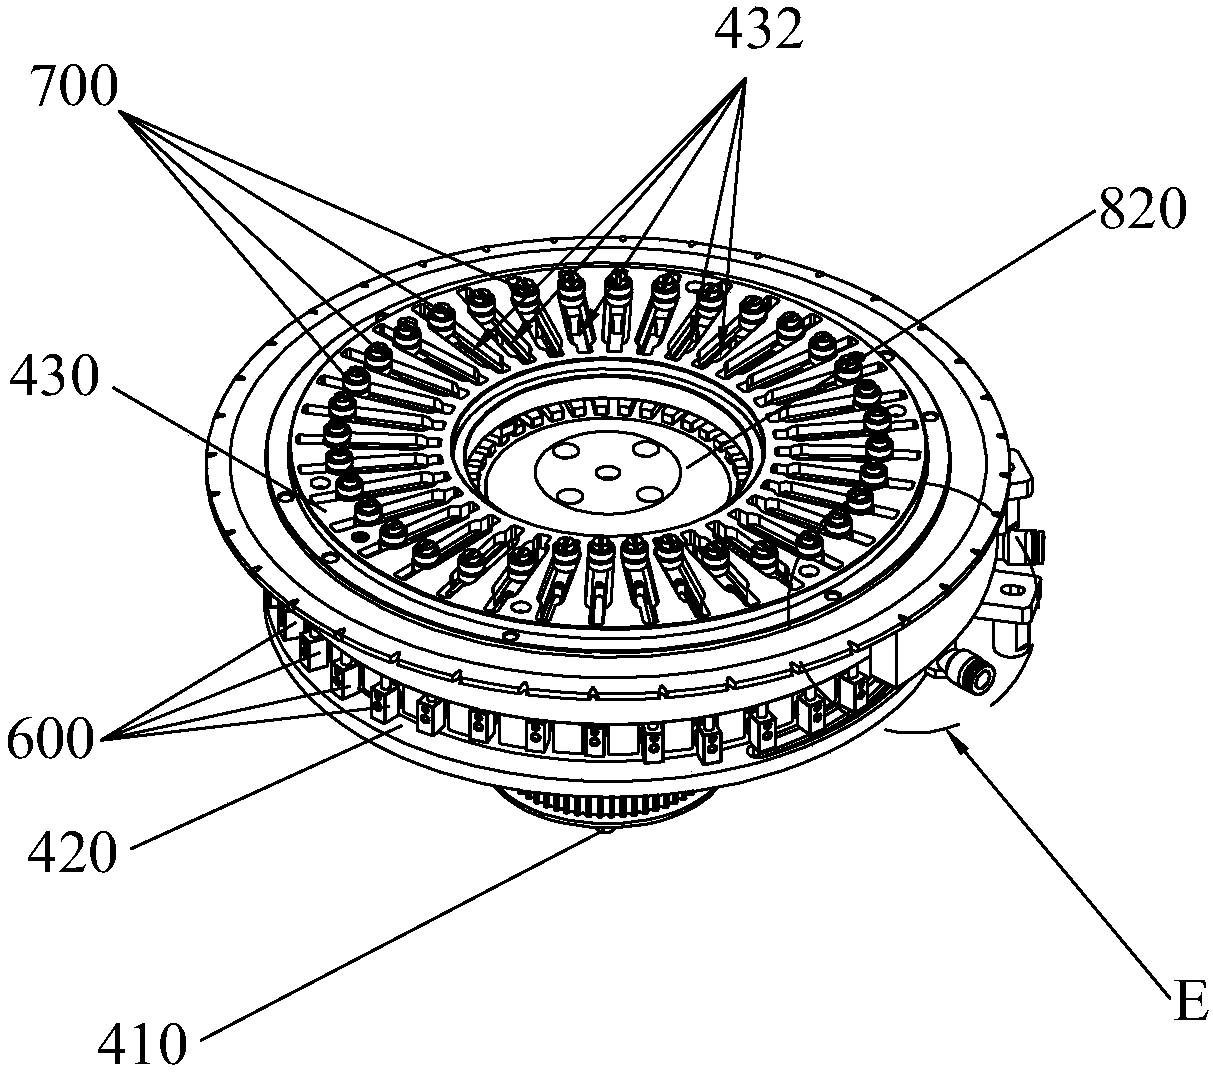 Horizontal-type particle high-speed implanting device